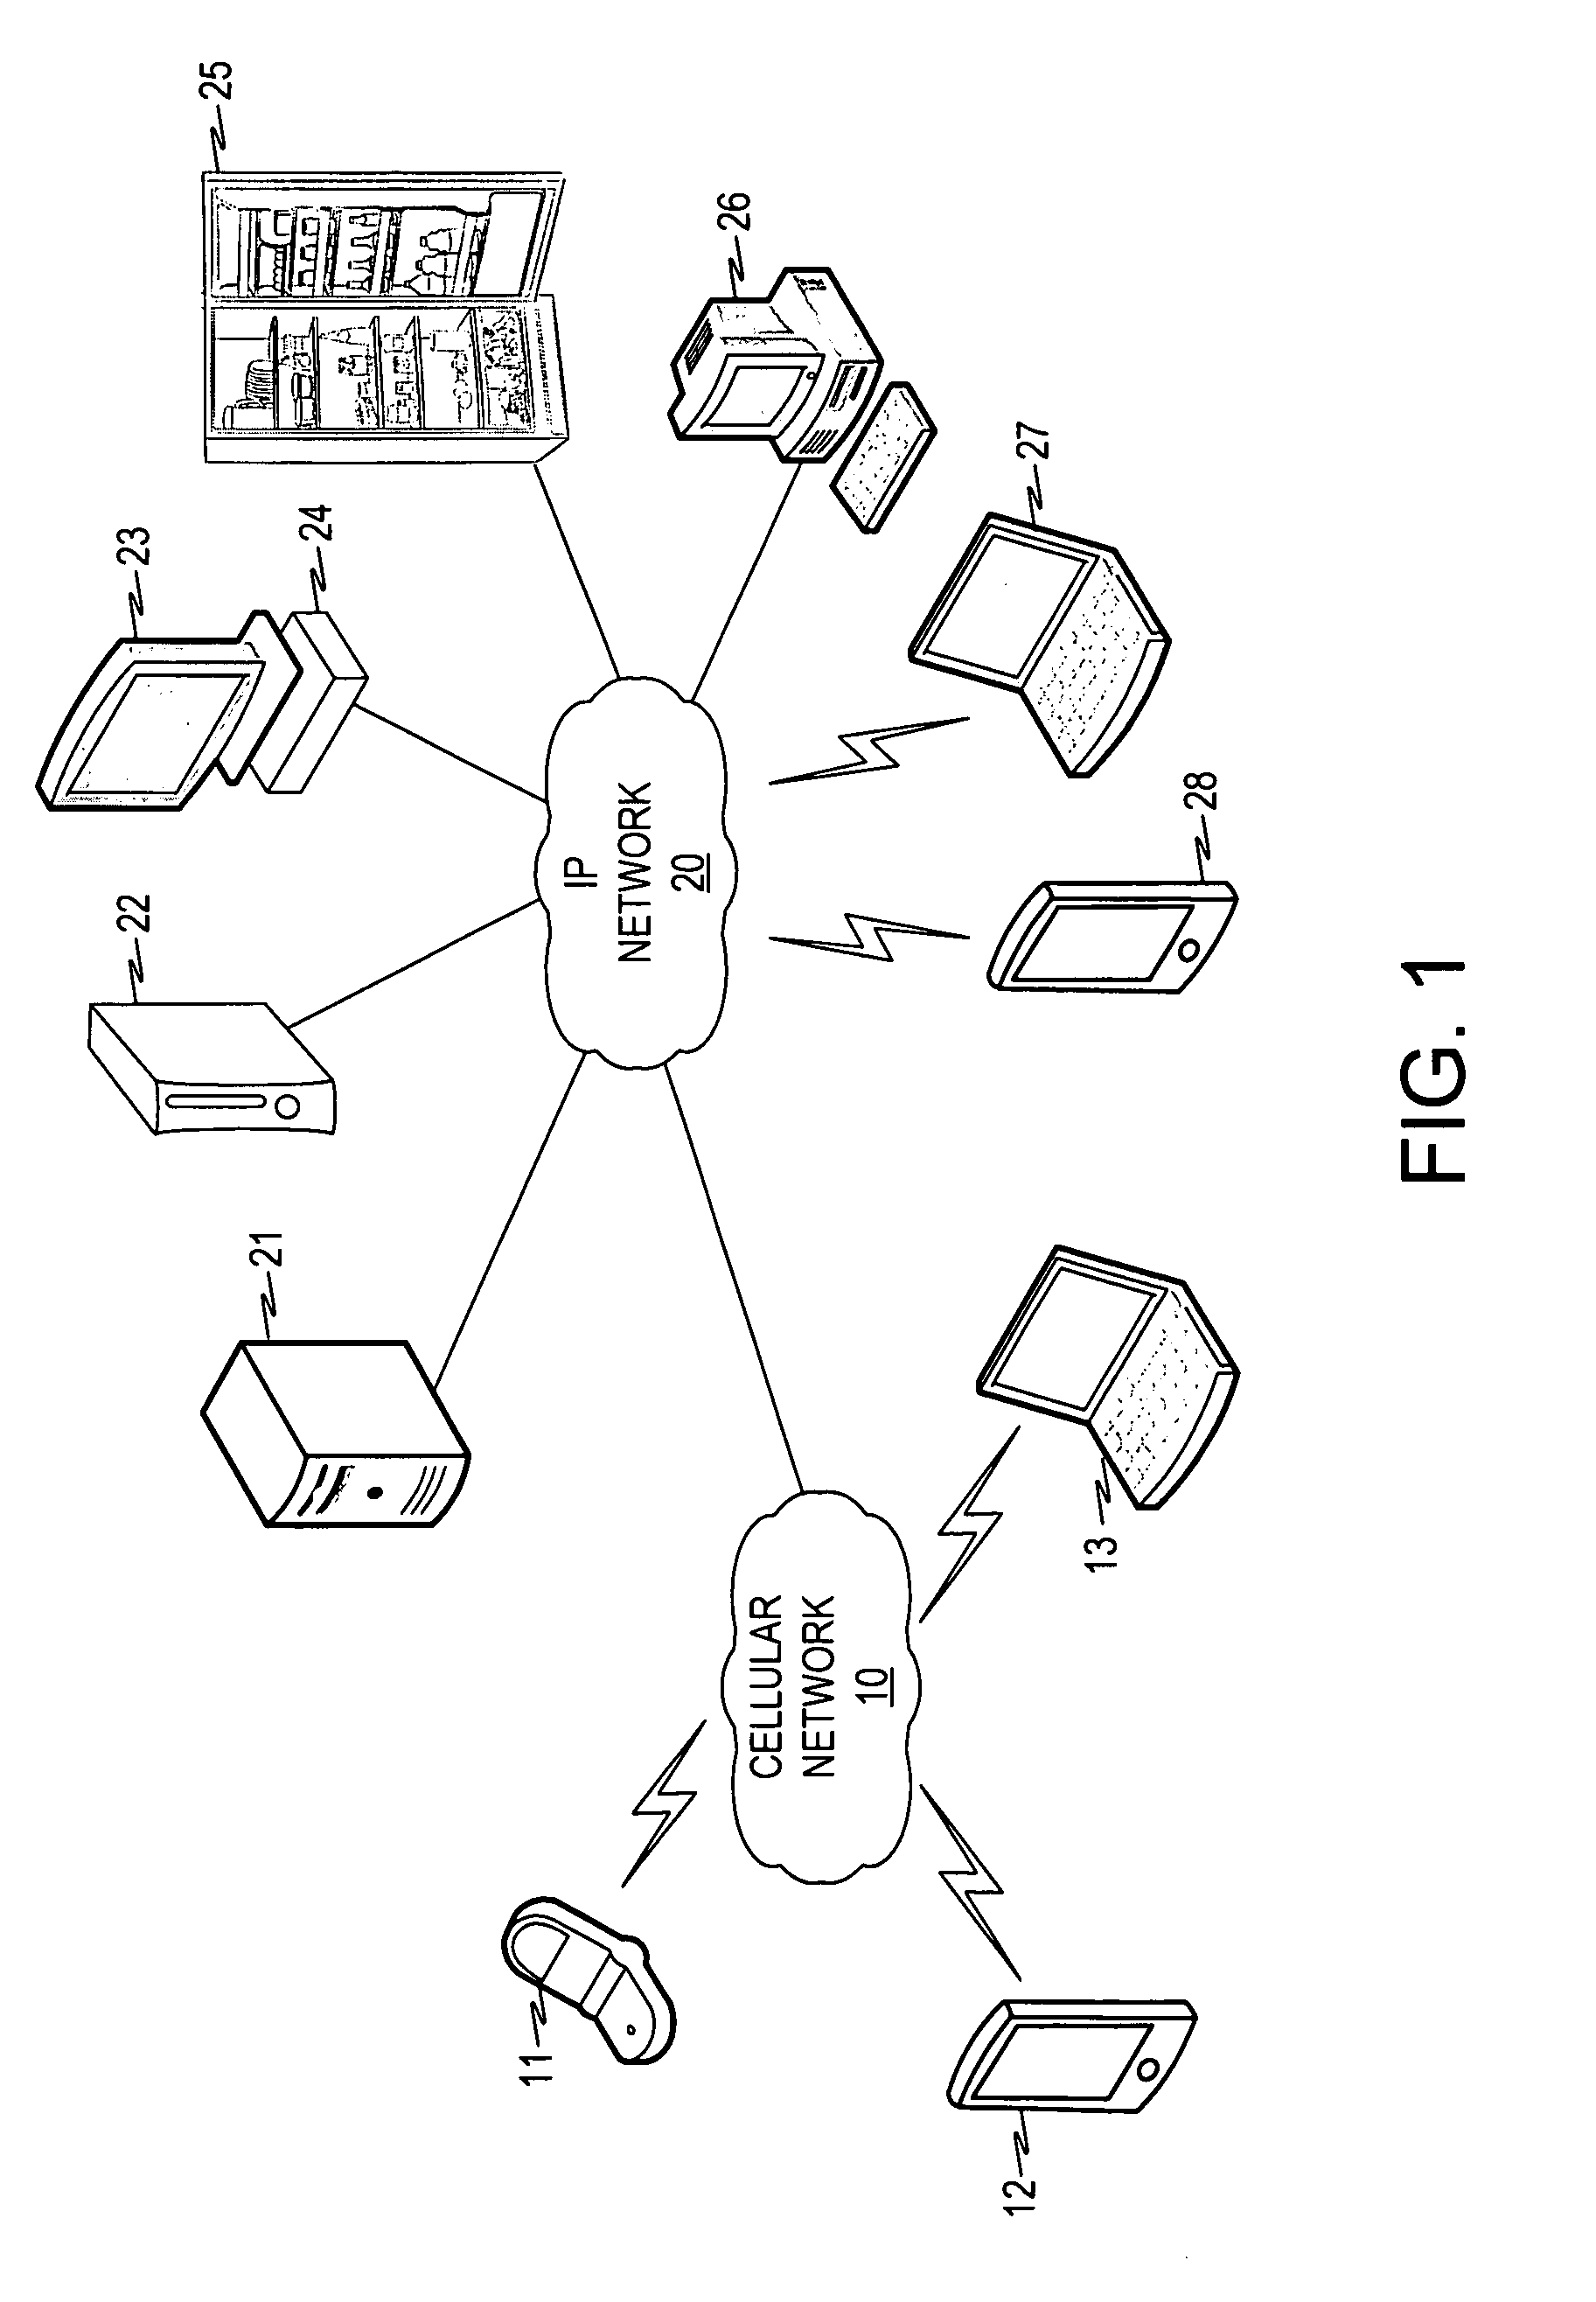 System, method and apparatus for controlling multiple applications and services on a digital electronic device